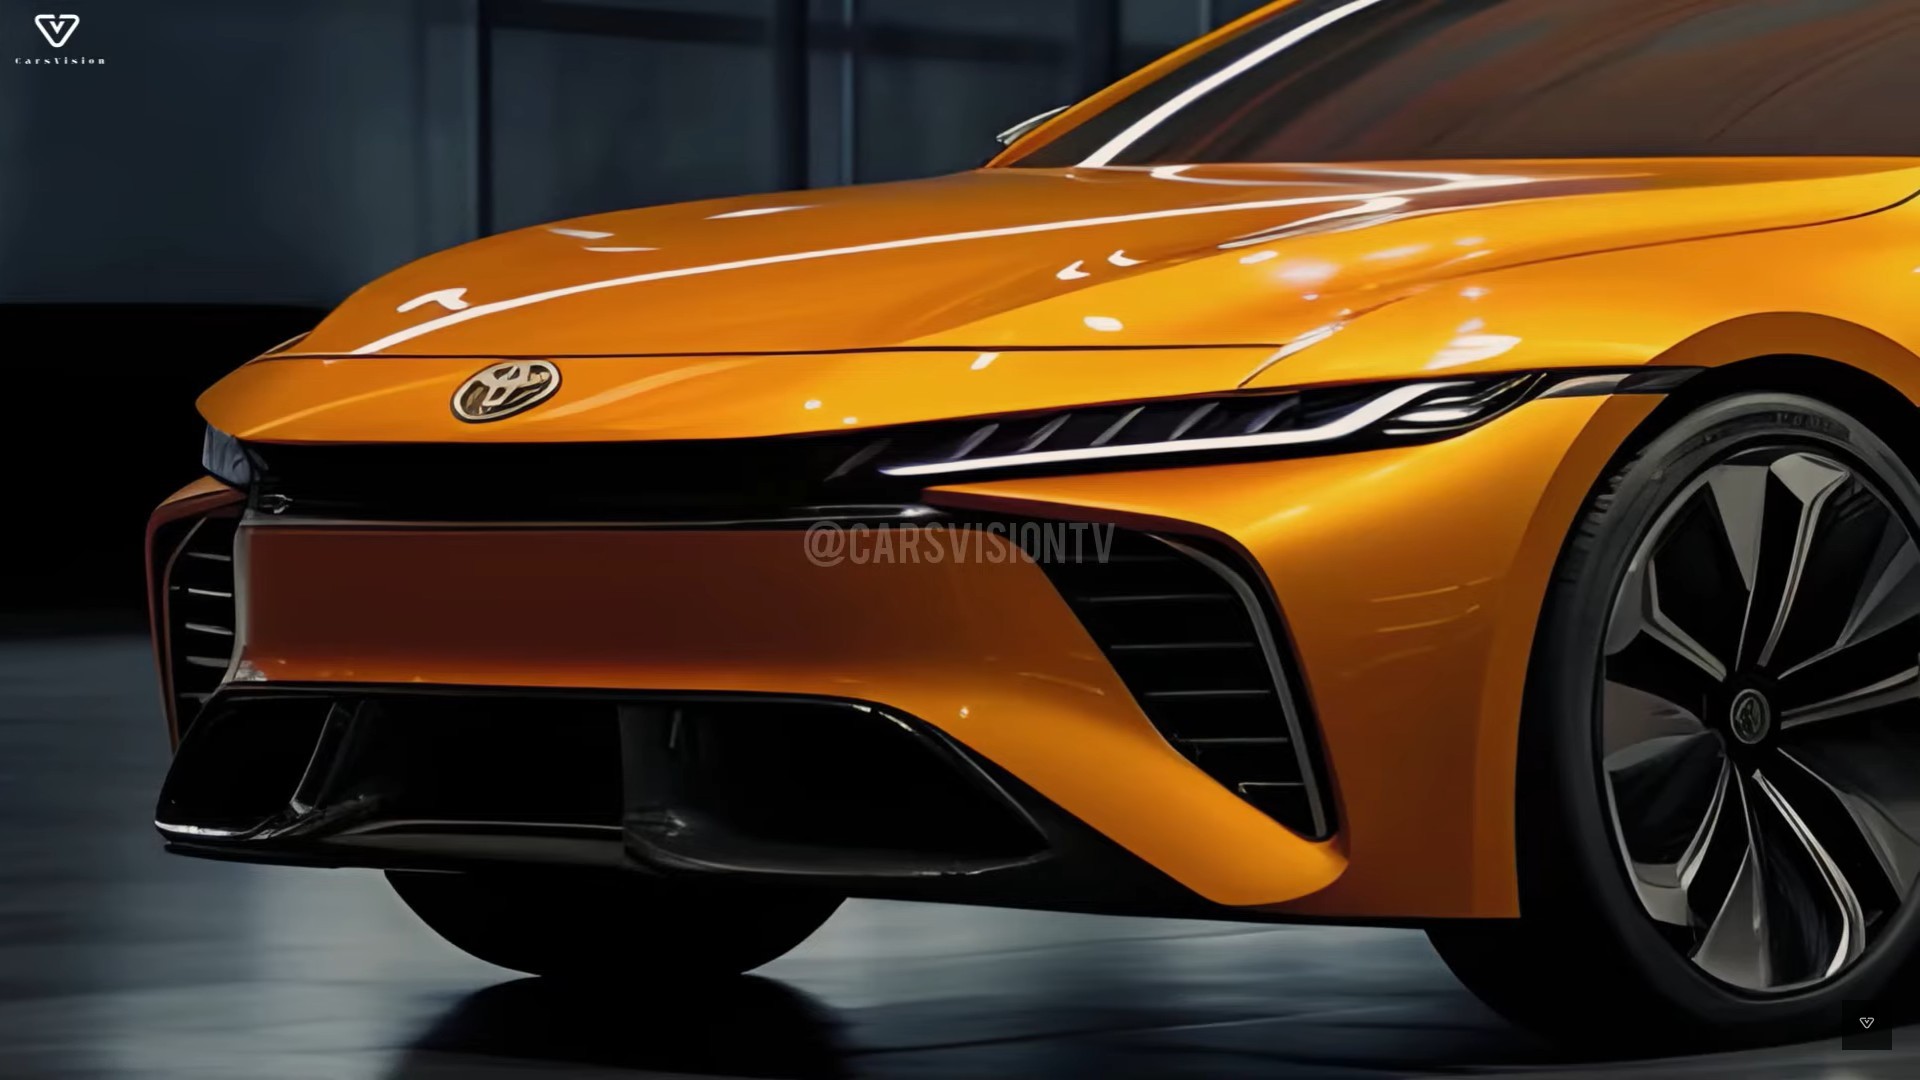 next-gen-2025-toyota-corolla-fastback-redesign-appears-stylish-and-modern-in-cgi-1.jpg